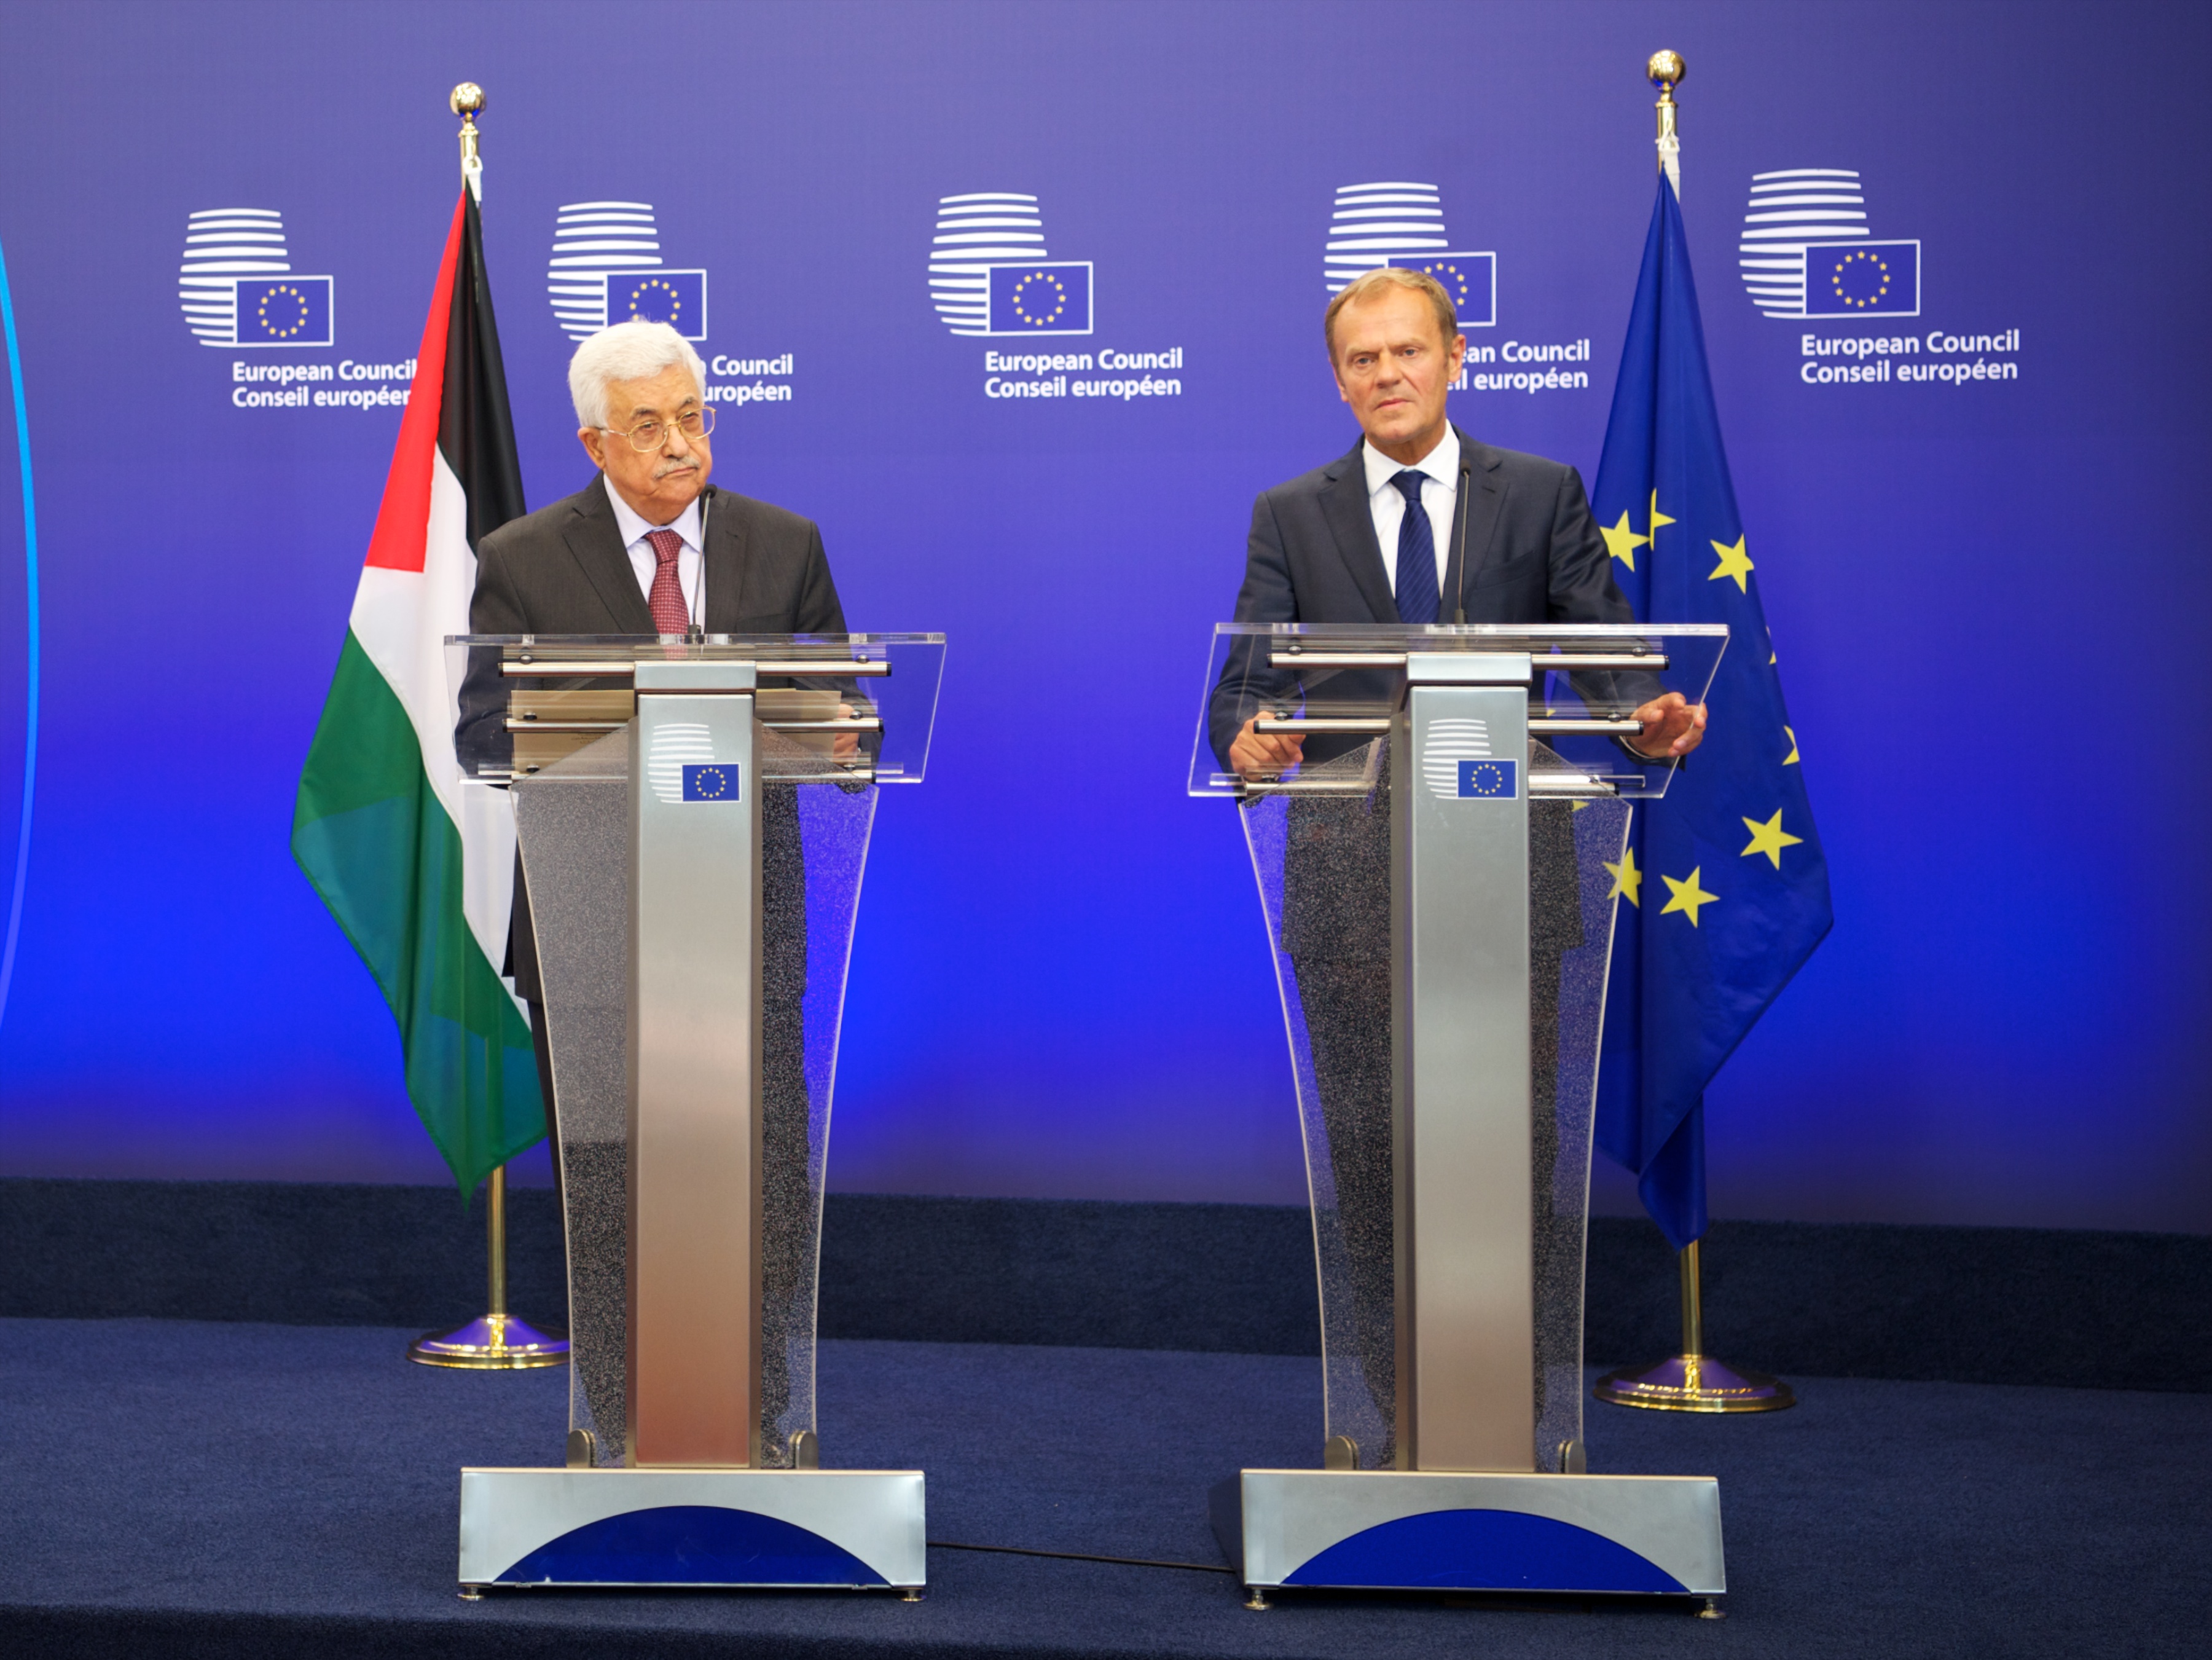 President of the European Council, Donald Tusk with the Palestinian President Mahmoud Abbas during the press conference